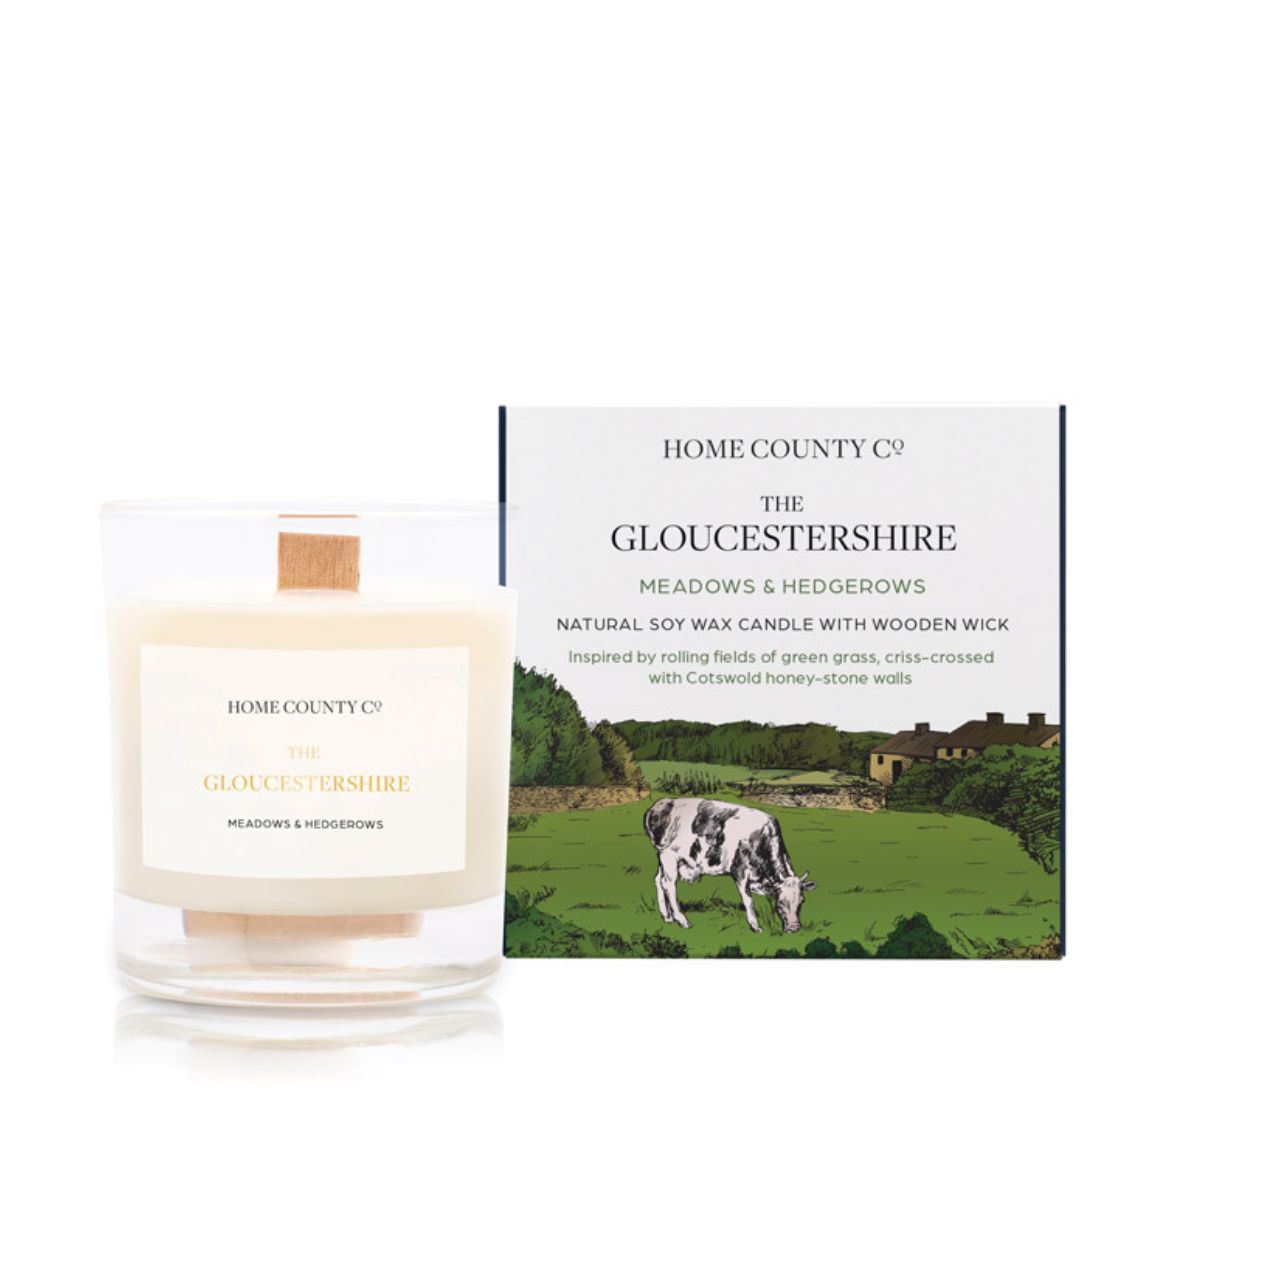 A freshly cut grass scented candle from Home County Co. The wooden wick soy candle is shown next to the eco friendly candle box packaging which displays an illustration of Cotswold hills.